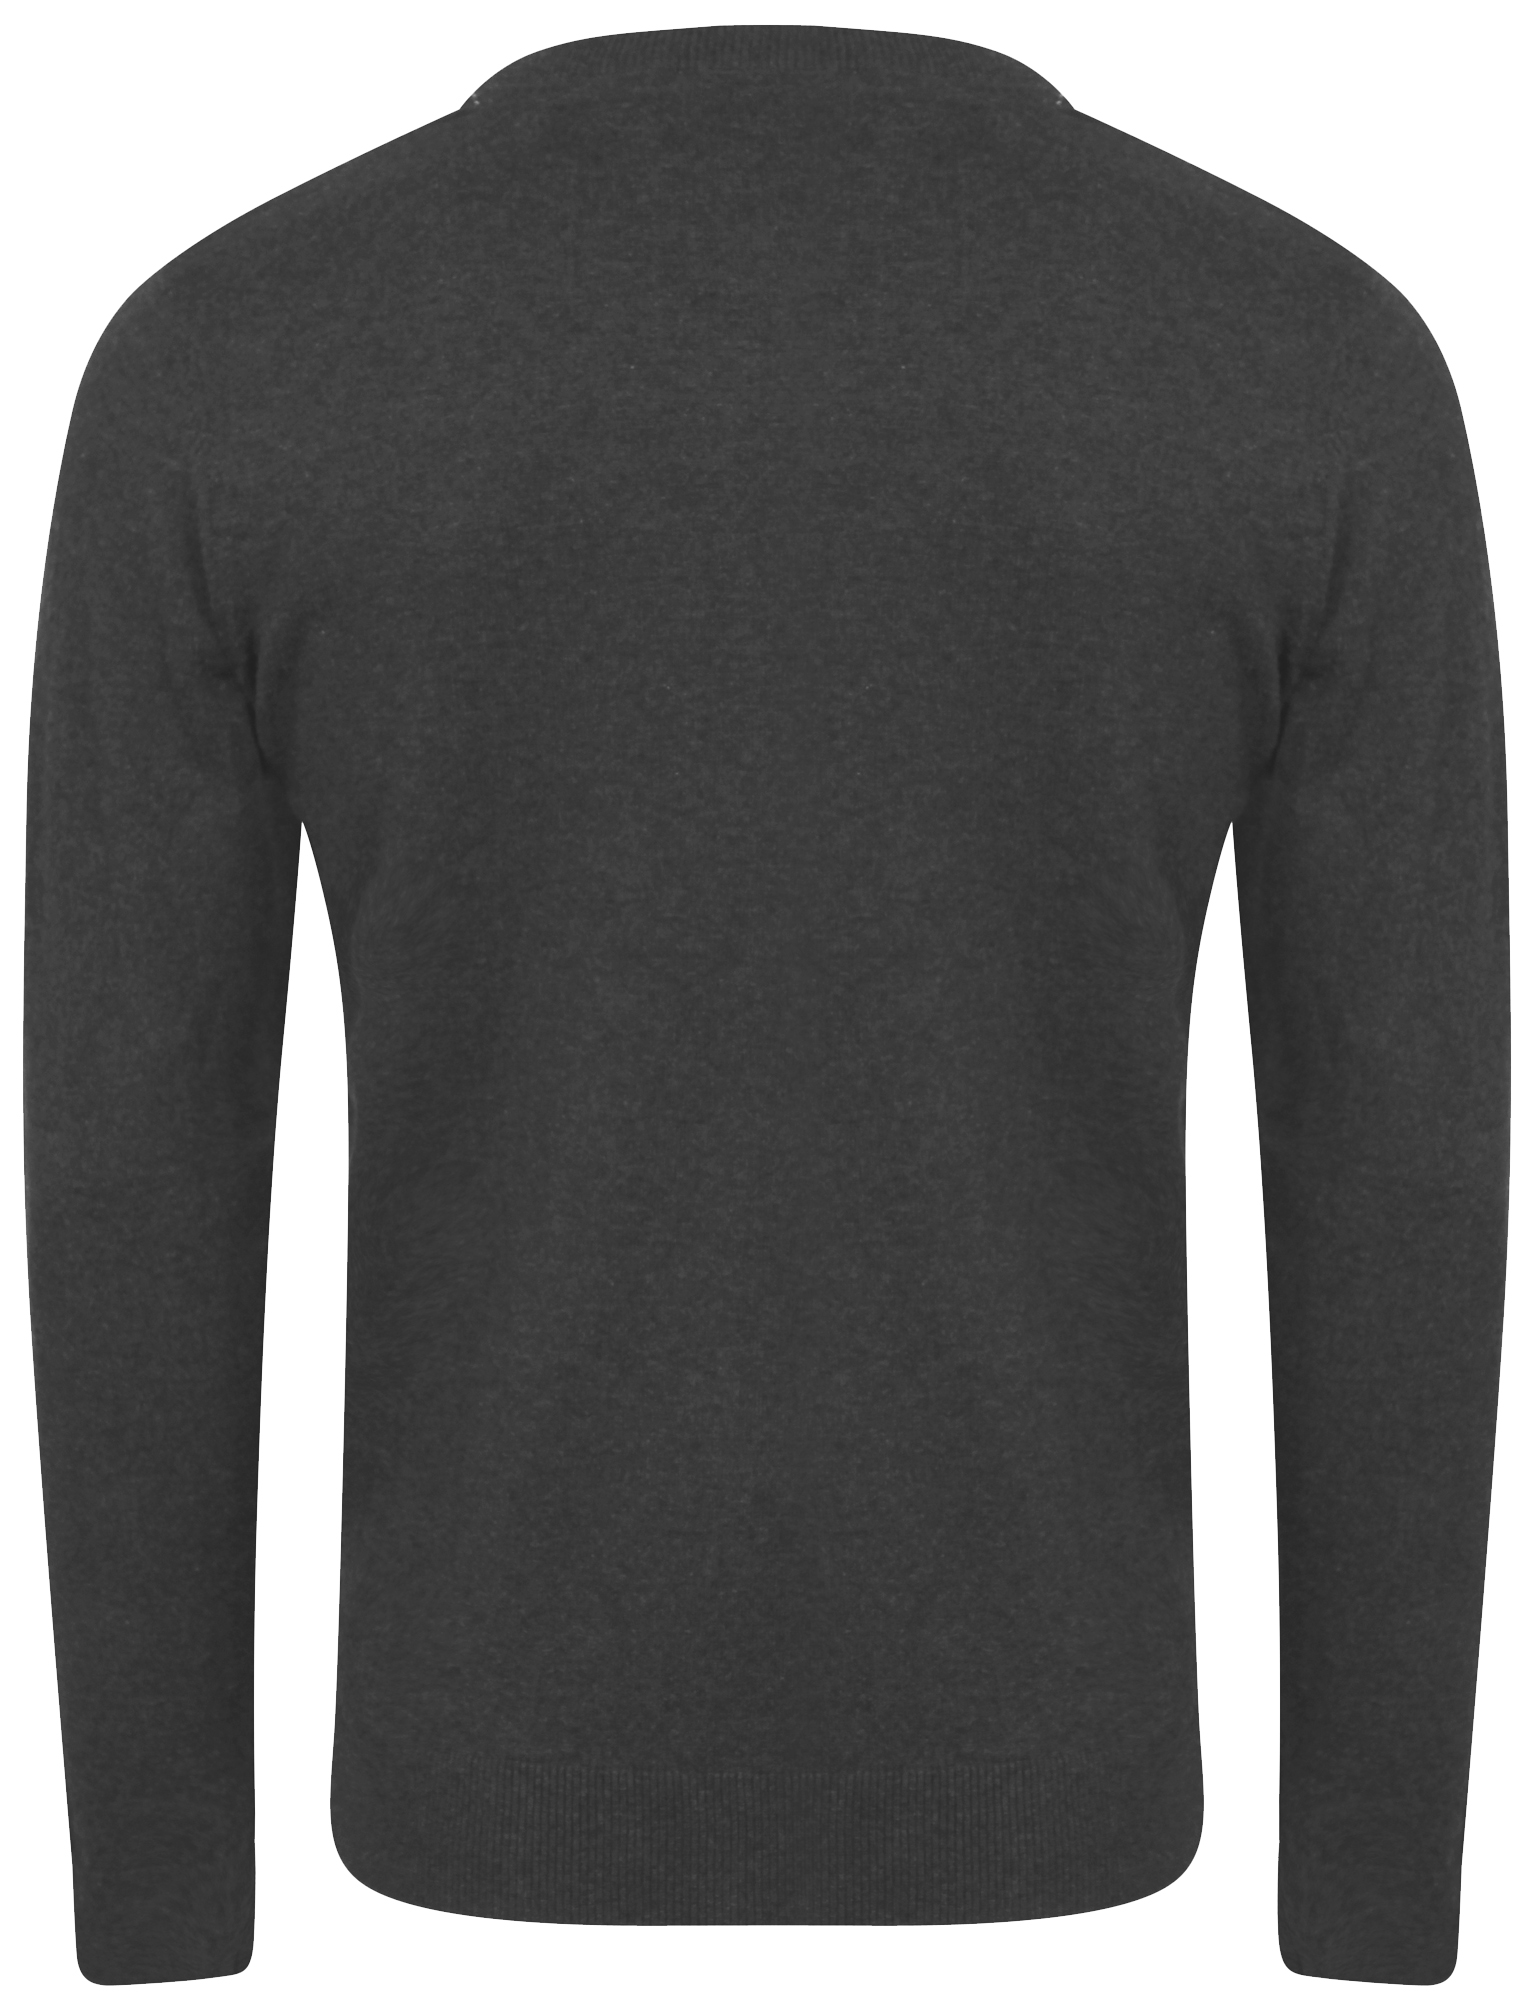 New Mens Tokyo Laundry Iver Knitted Long Sleeve Crew Neck Jumper Top Size S-XXL